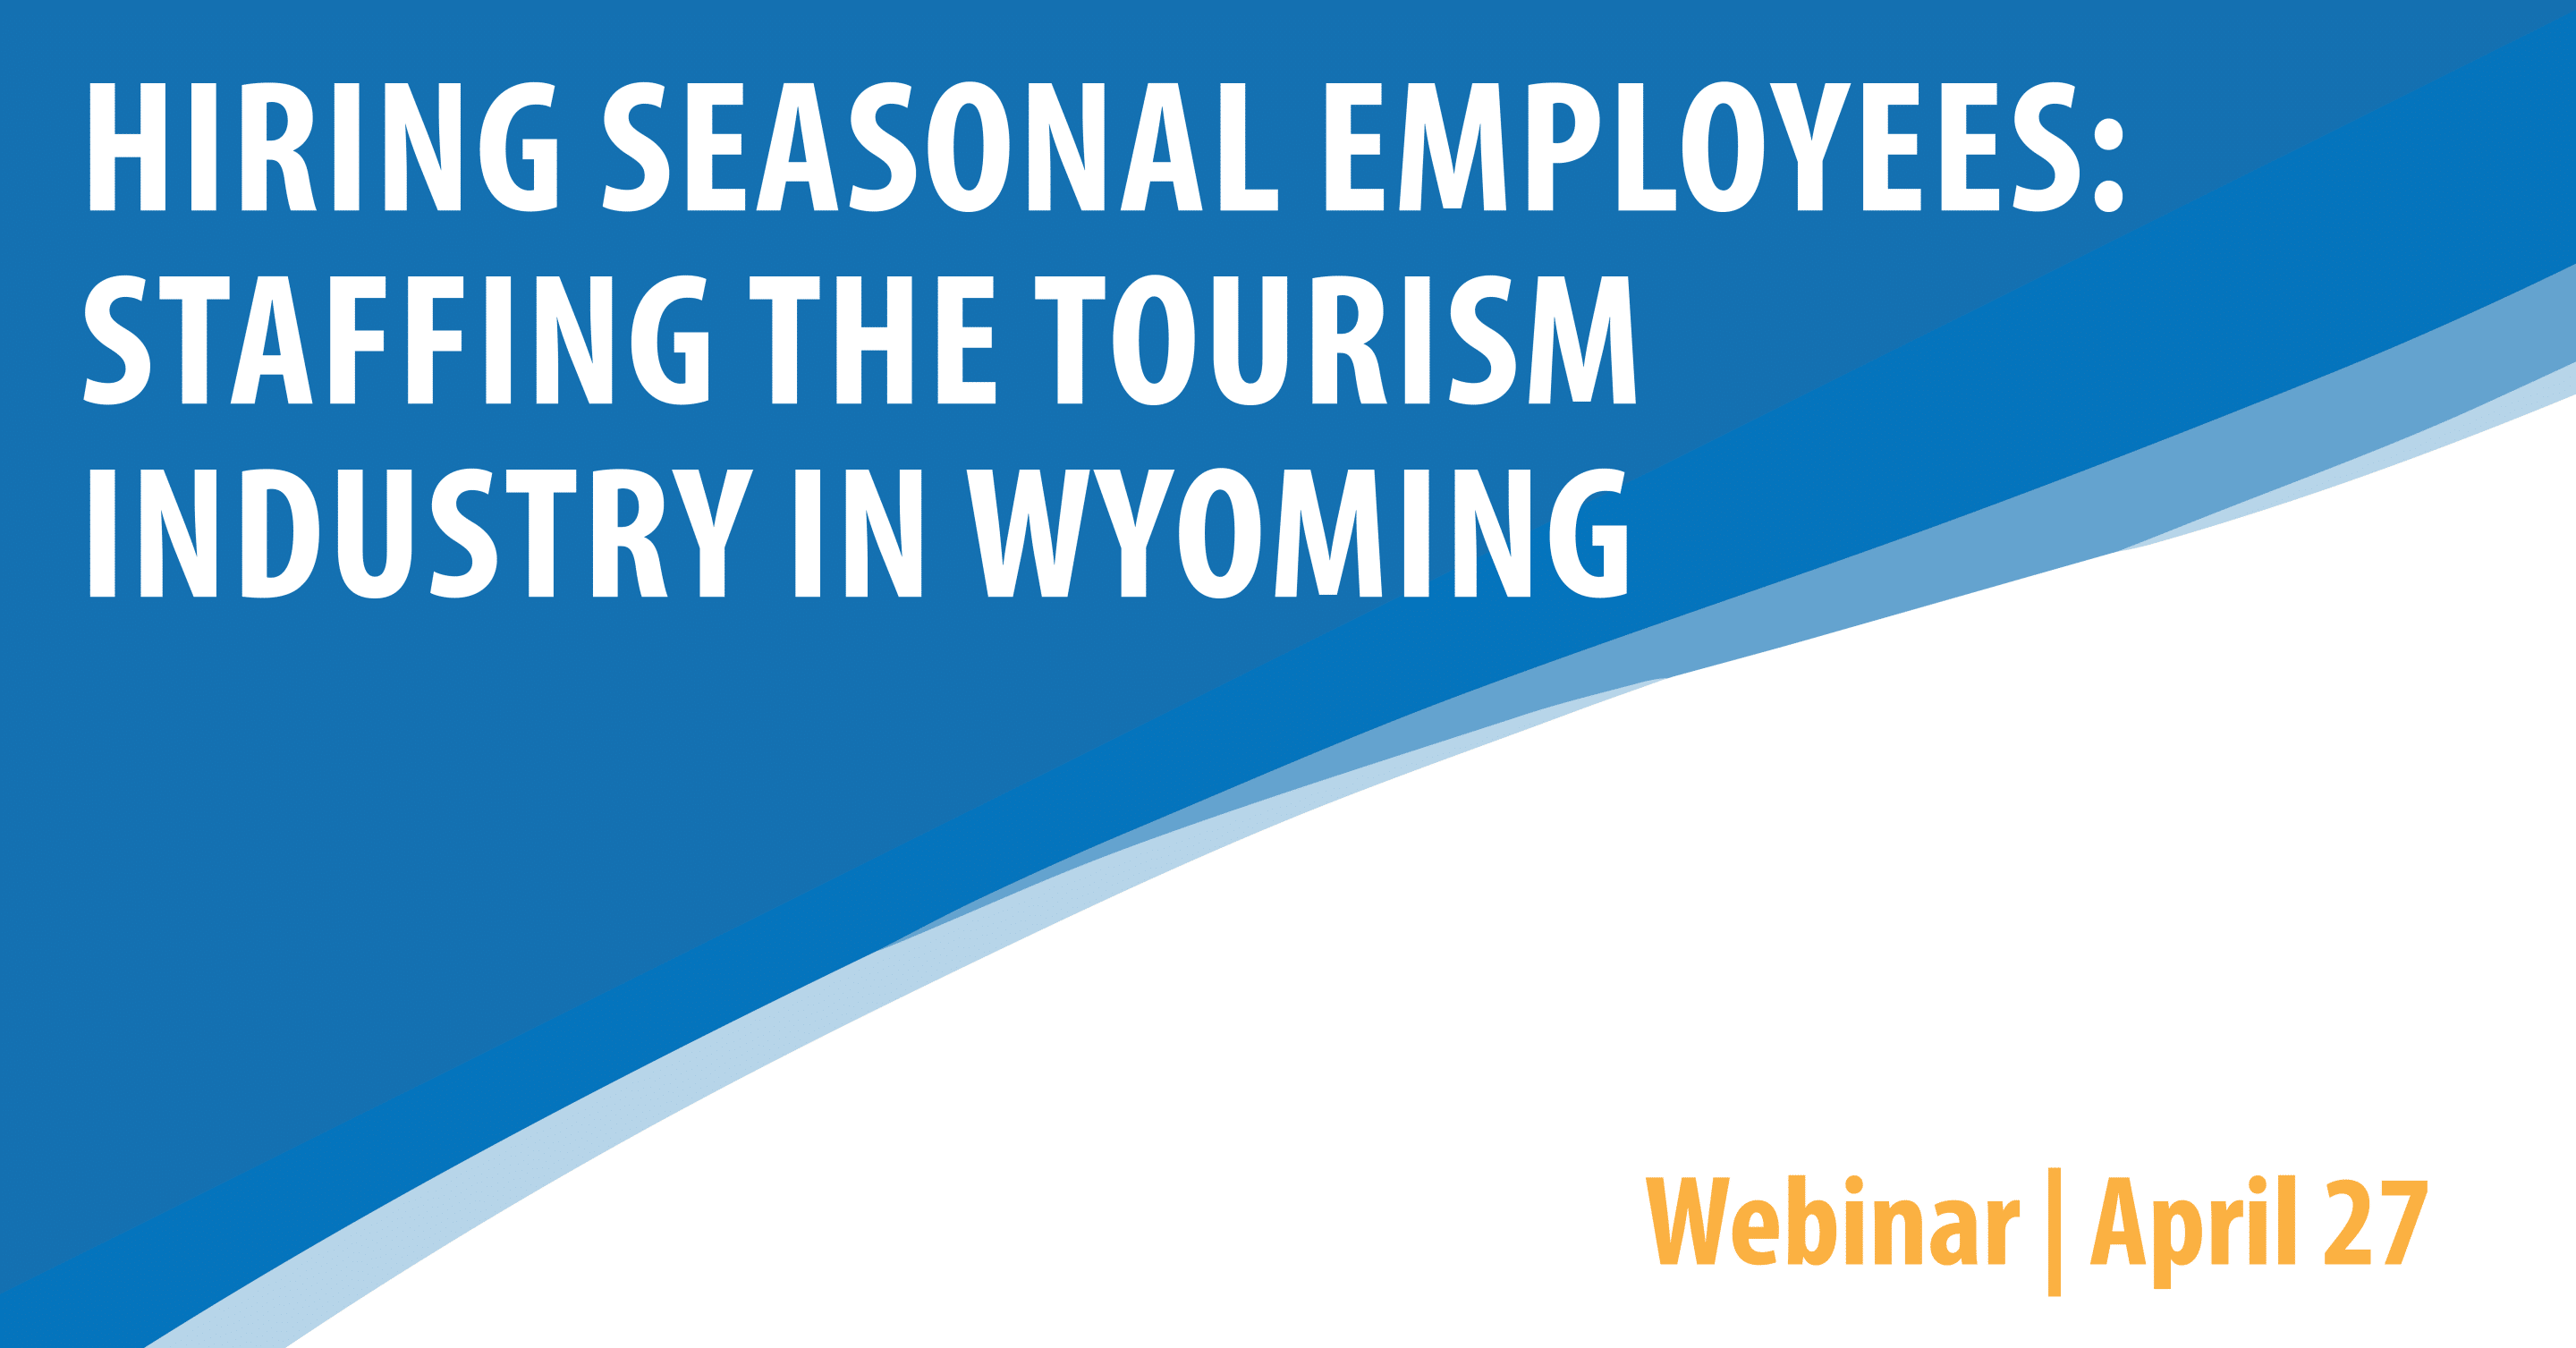 Hiring Seasonal Employees: Staffing the Tourism Industry In Wyoming